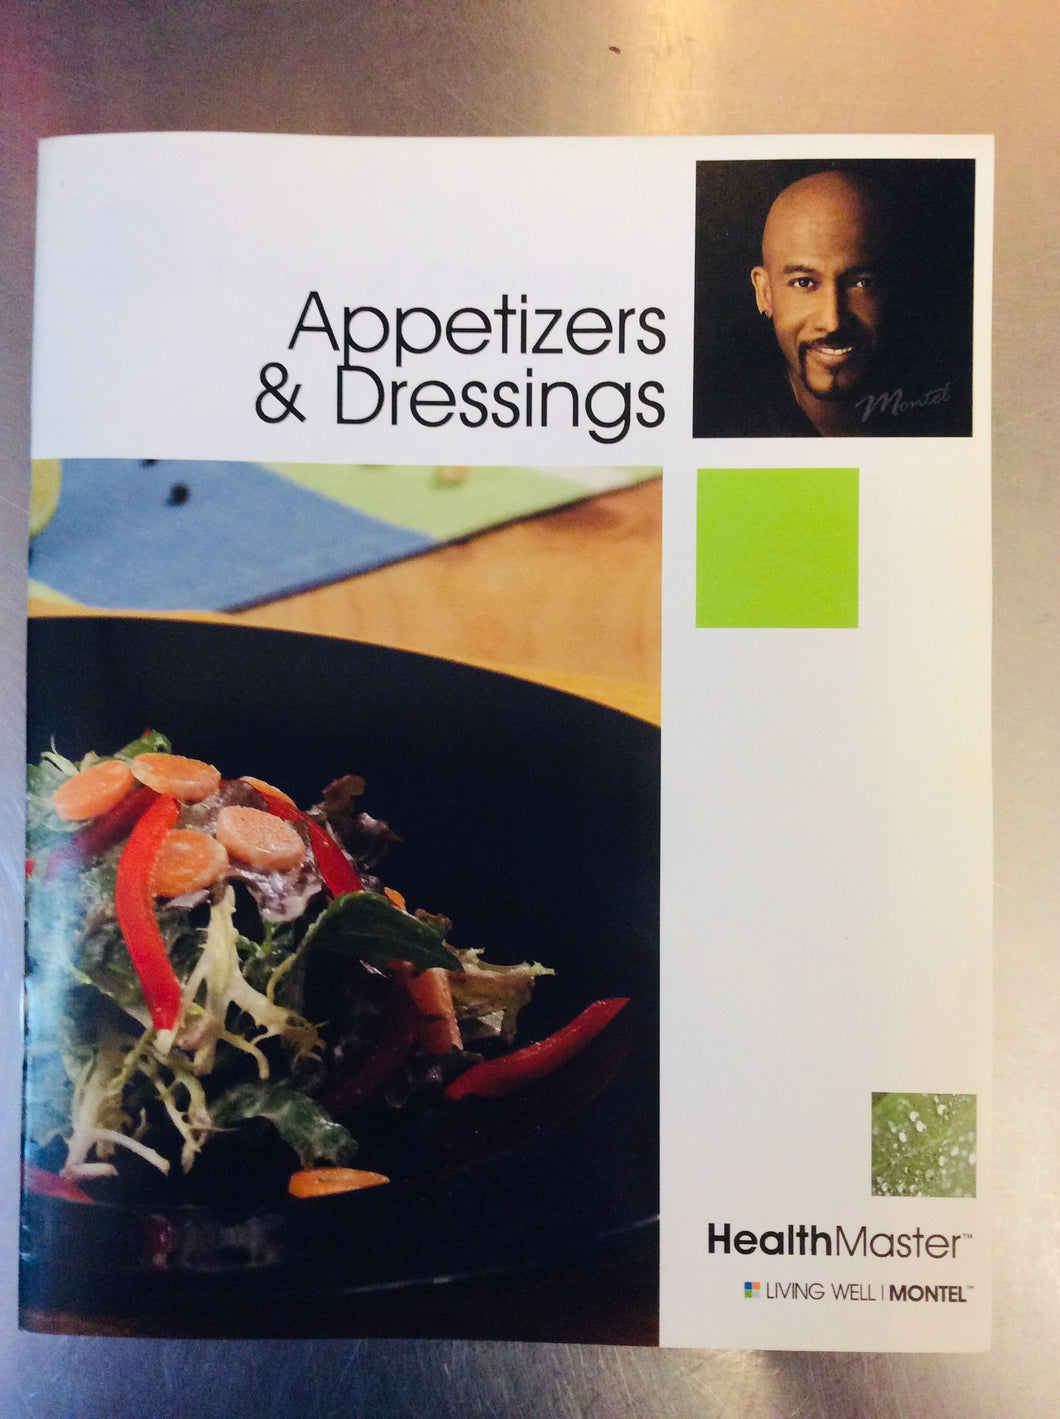 Appetizers & Dressings by HealthMaster